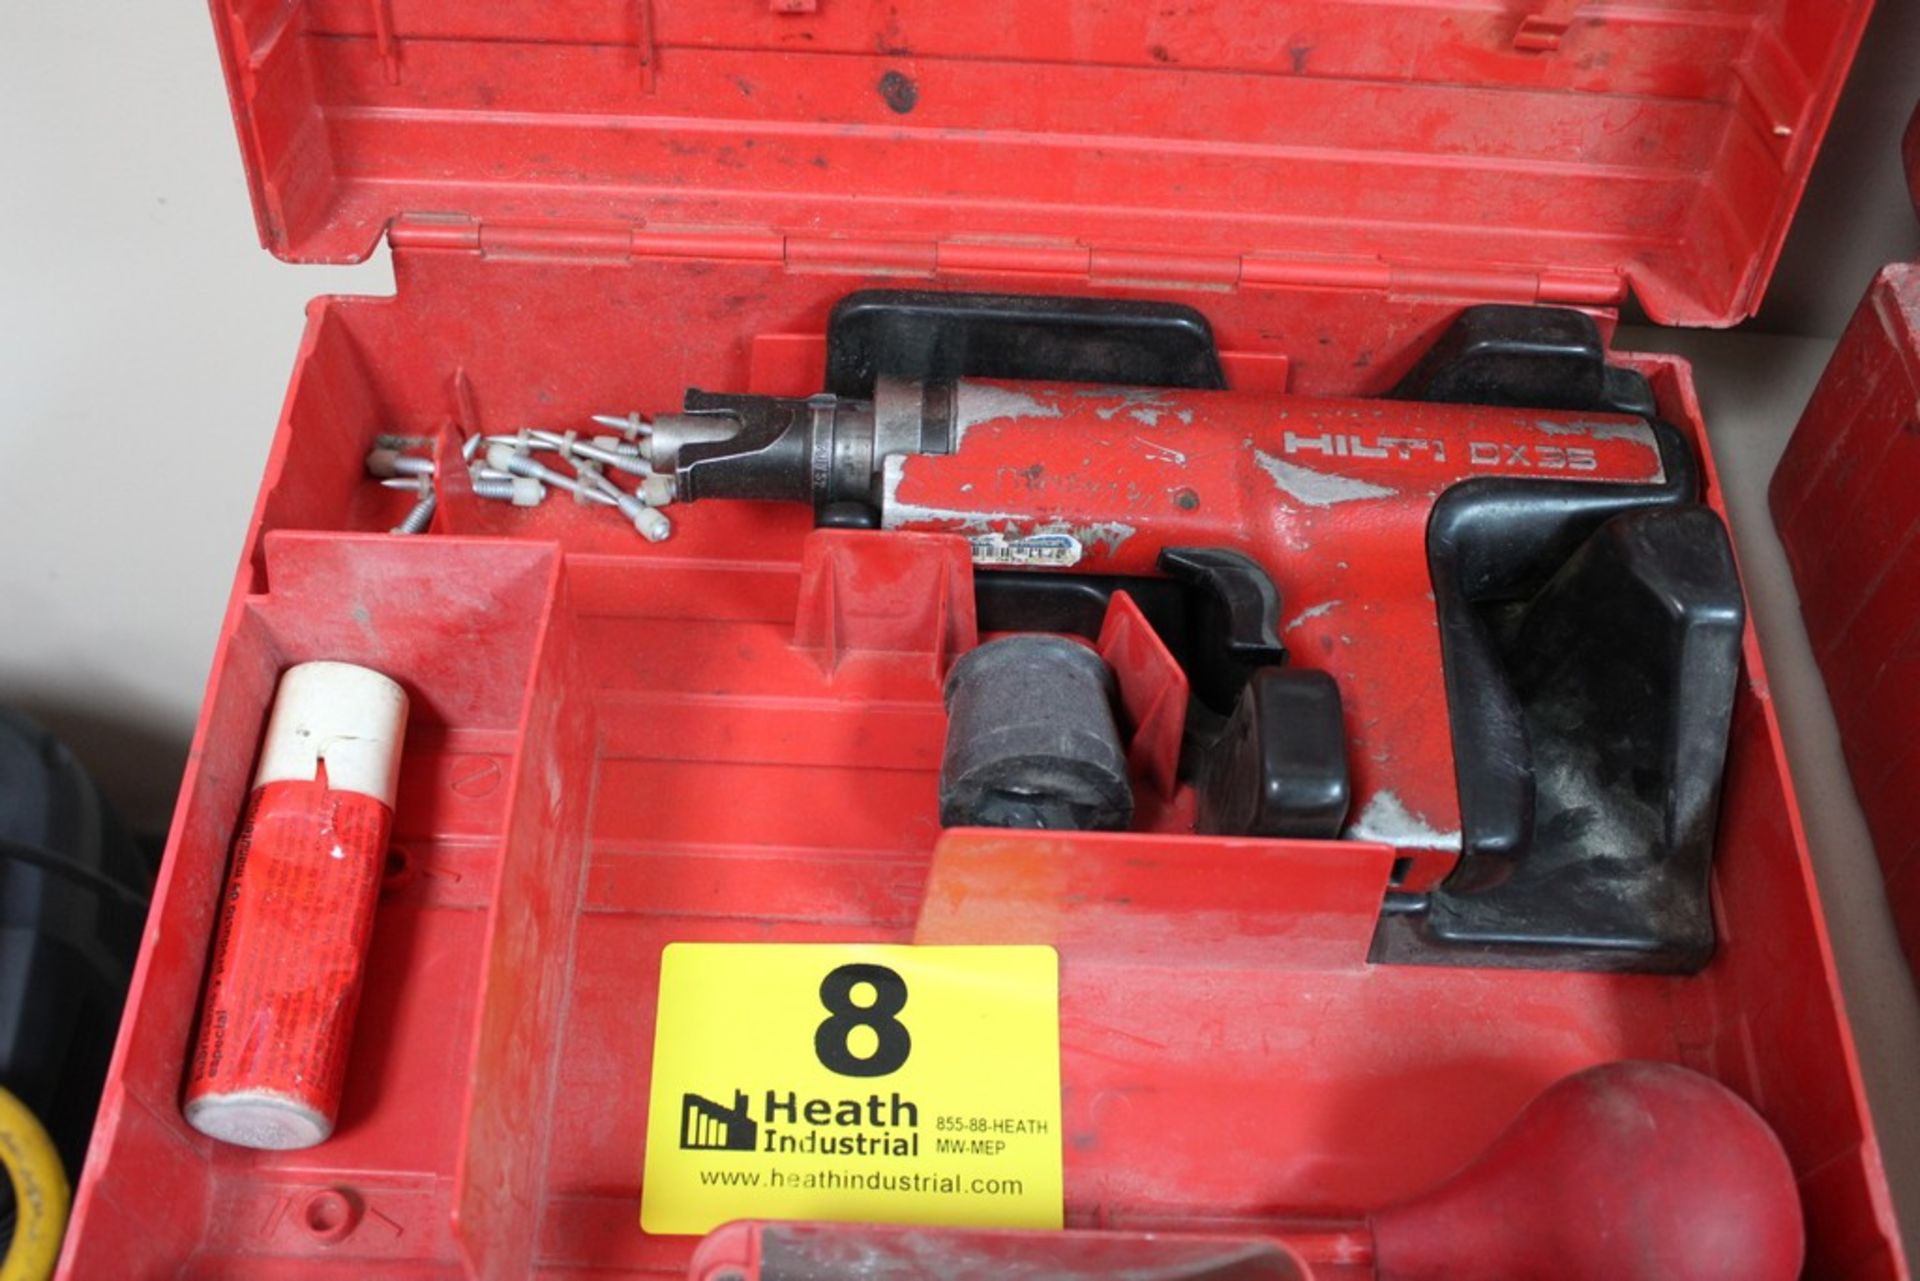 HILTI MODEL DX35 POWDER ACTUATED NAIL GUN WITH CASE